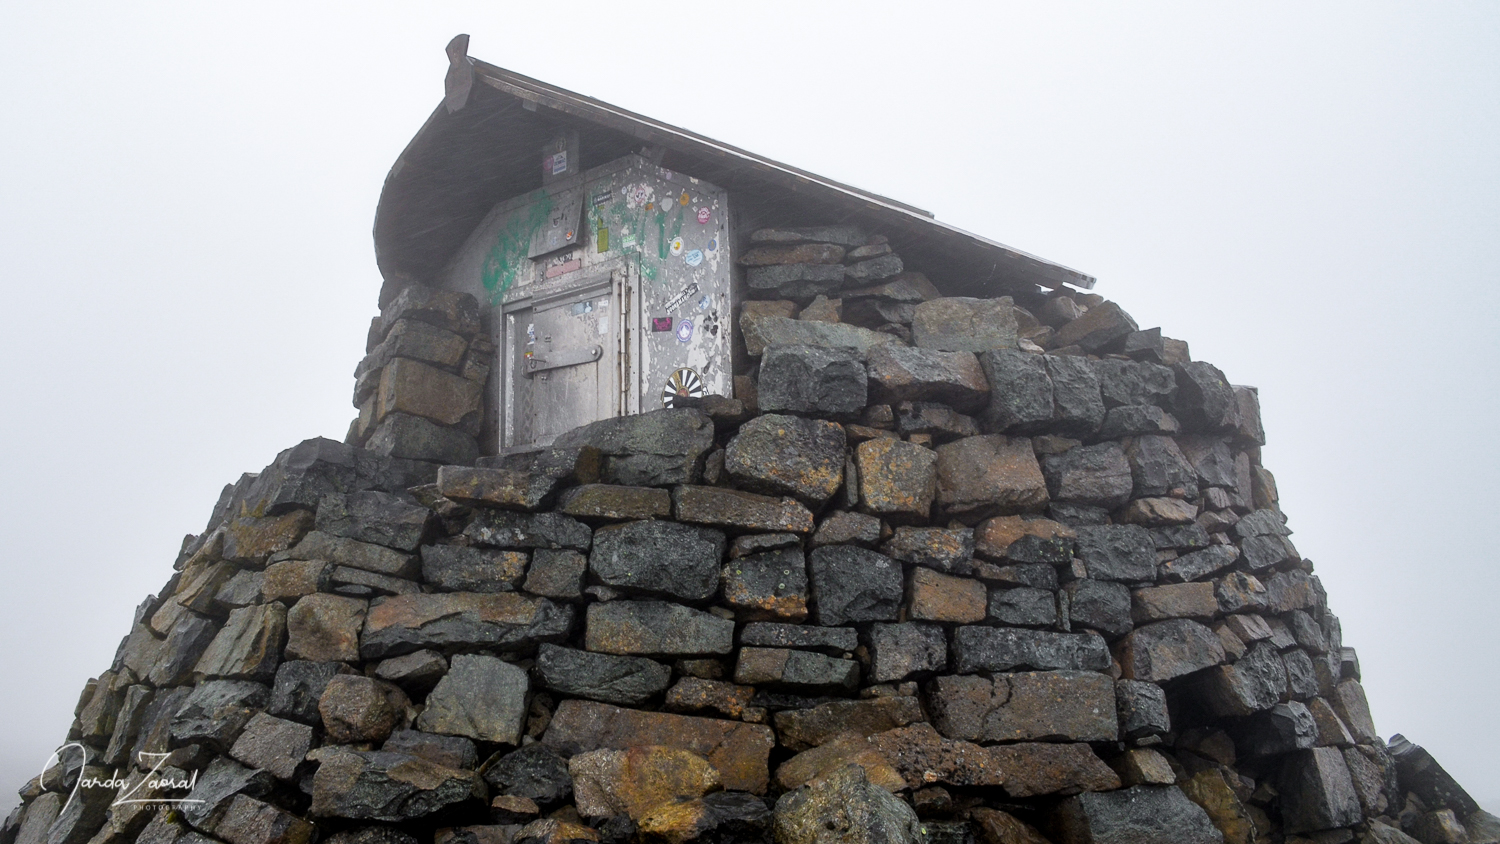 A shelter on the top of Ben Nevis